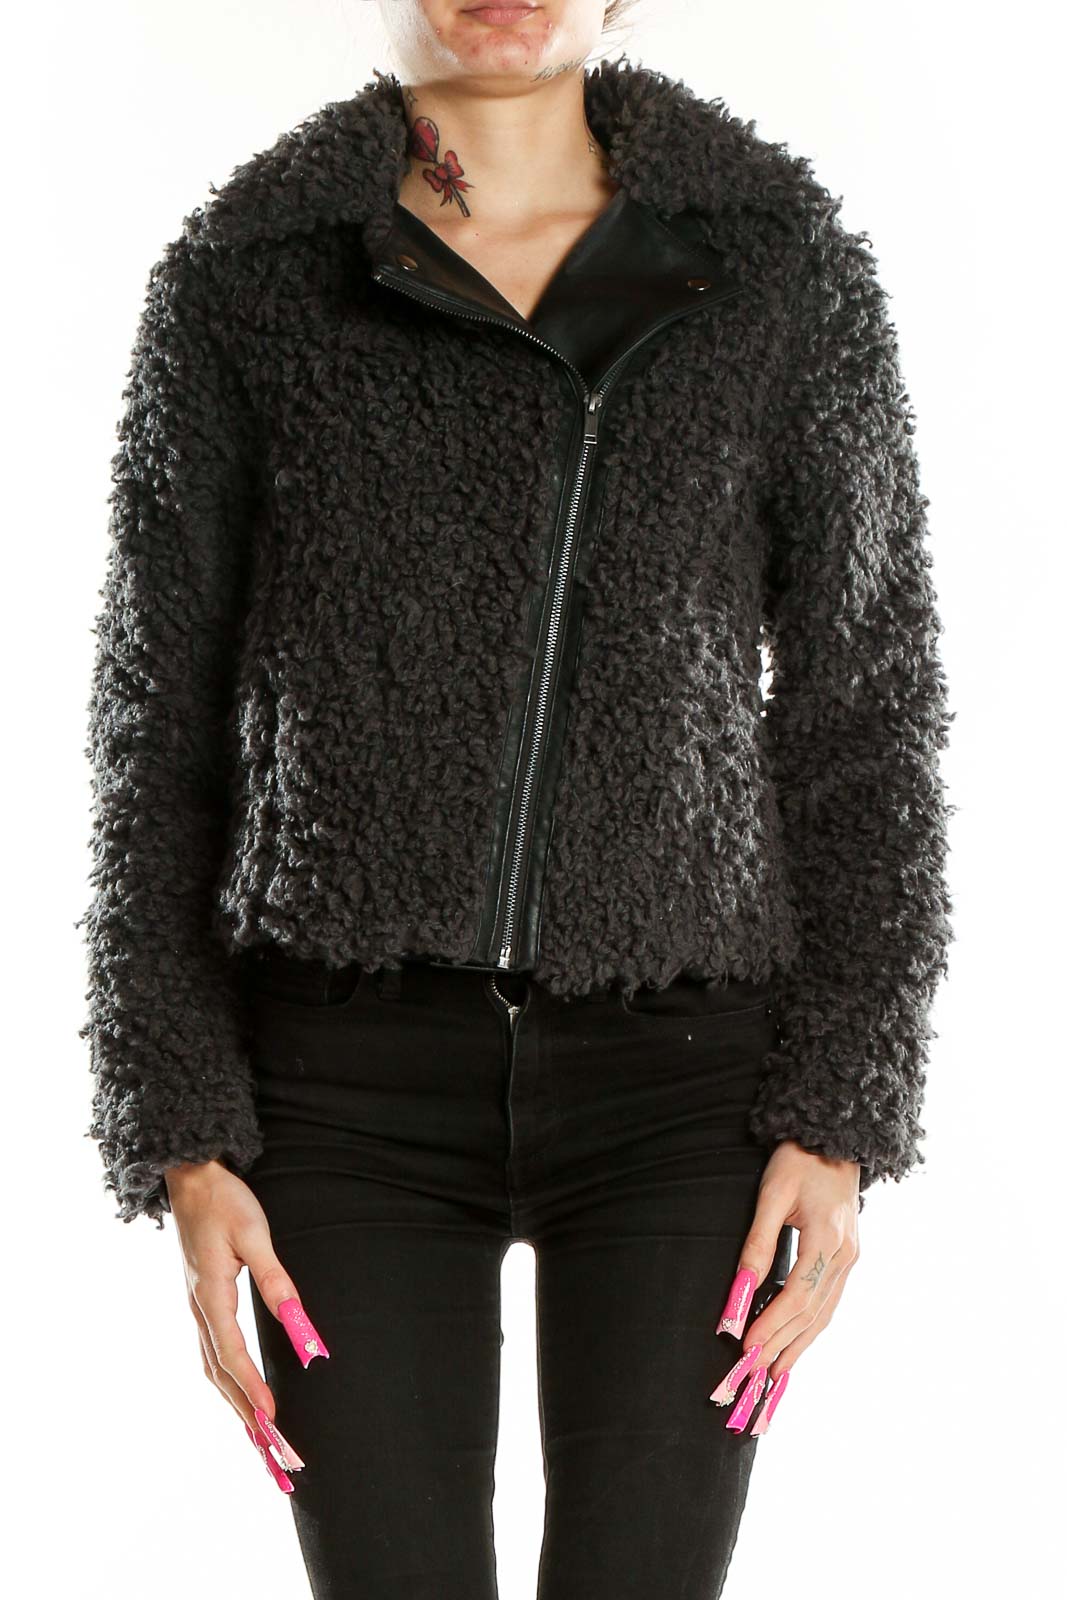 Black Fuzzy Motorcycle Jacket Front